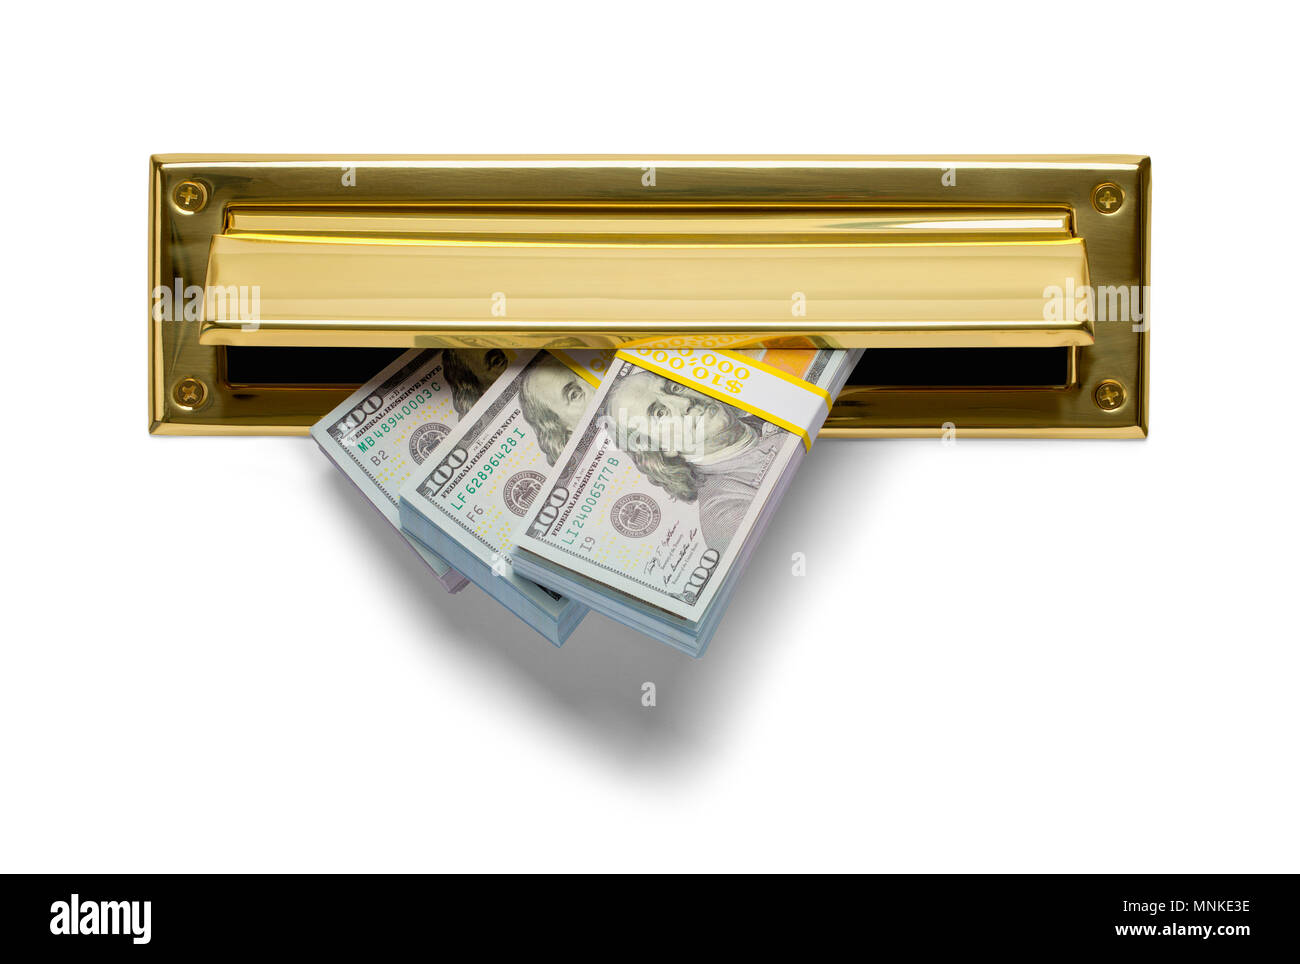 Gold Mail Slot with Lots of Money Isolated on White Background. Stock Photo